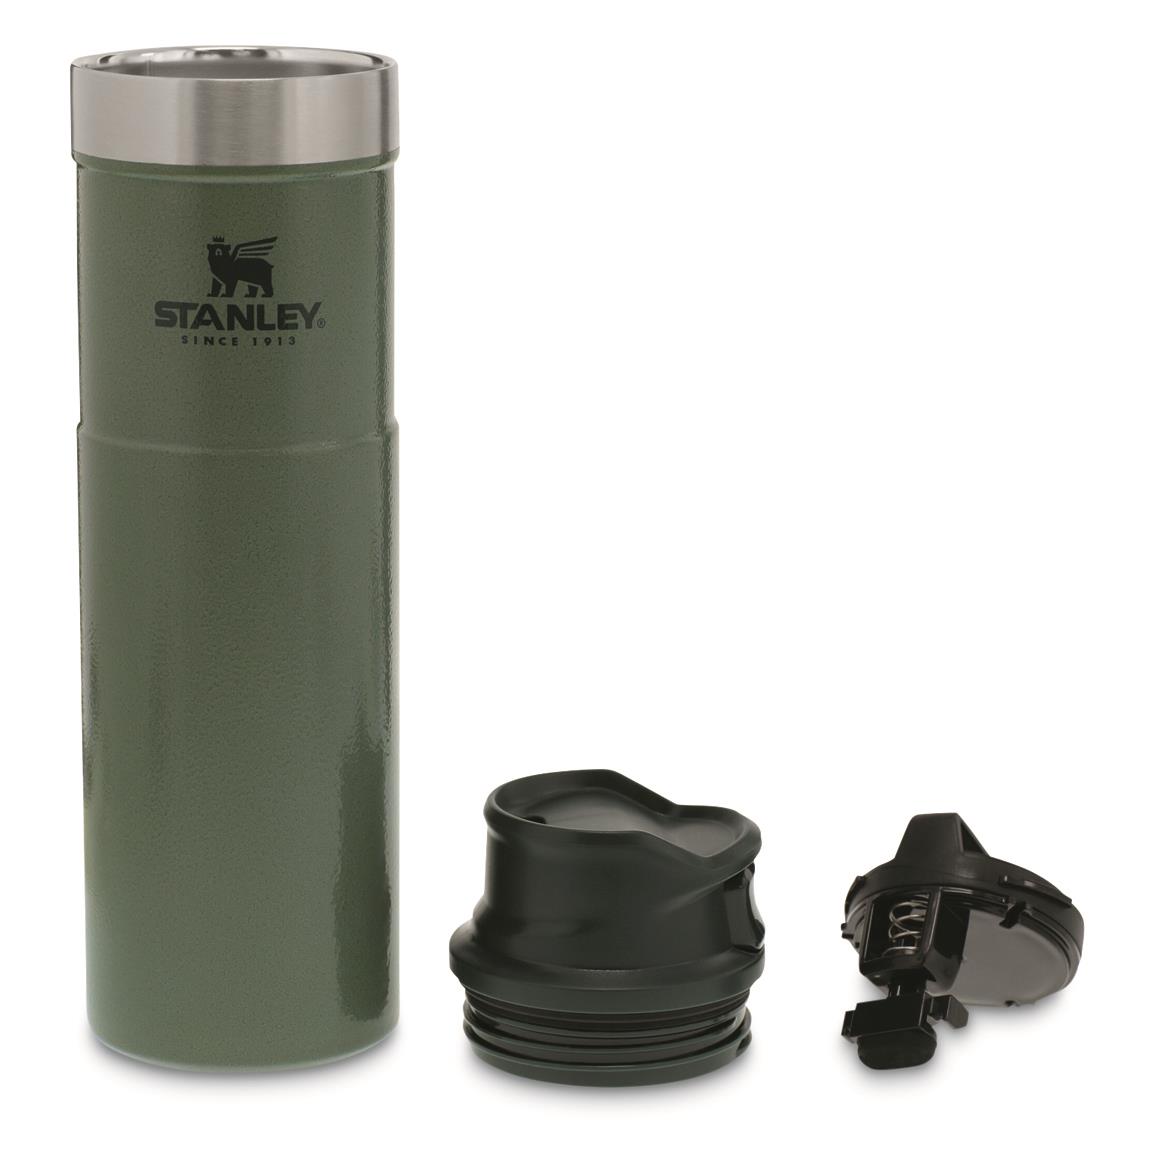 Stanley Classic Trigger-action Travel Mug, 20 oz. - 719668, Drinkware at  Sportsman's Guide